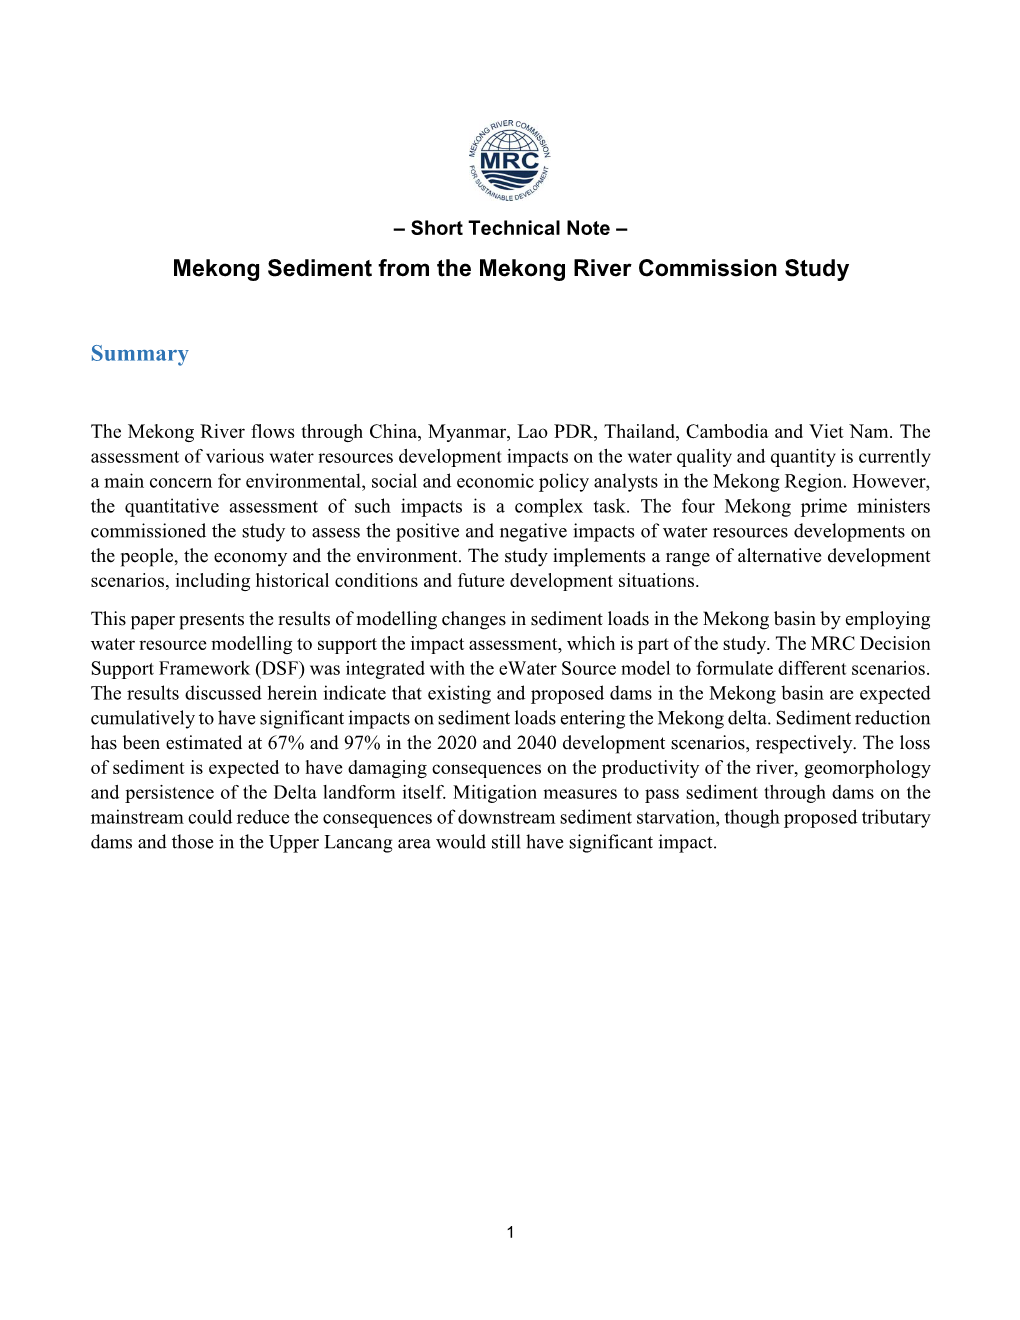 Mekong Sediment from the Mekong River Commission Study Summary